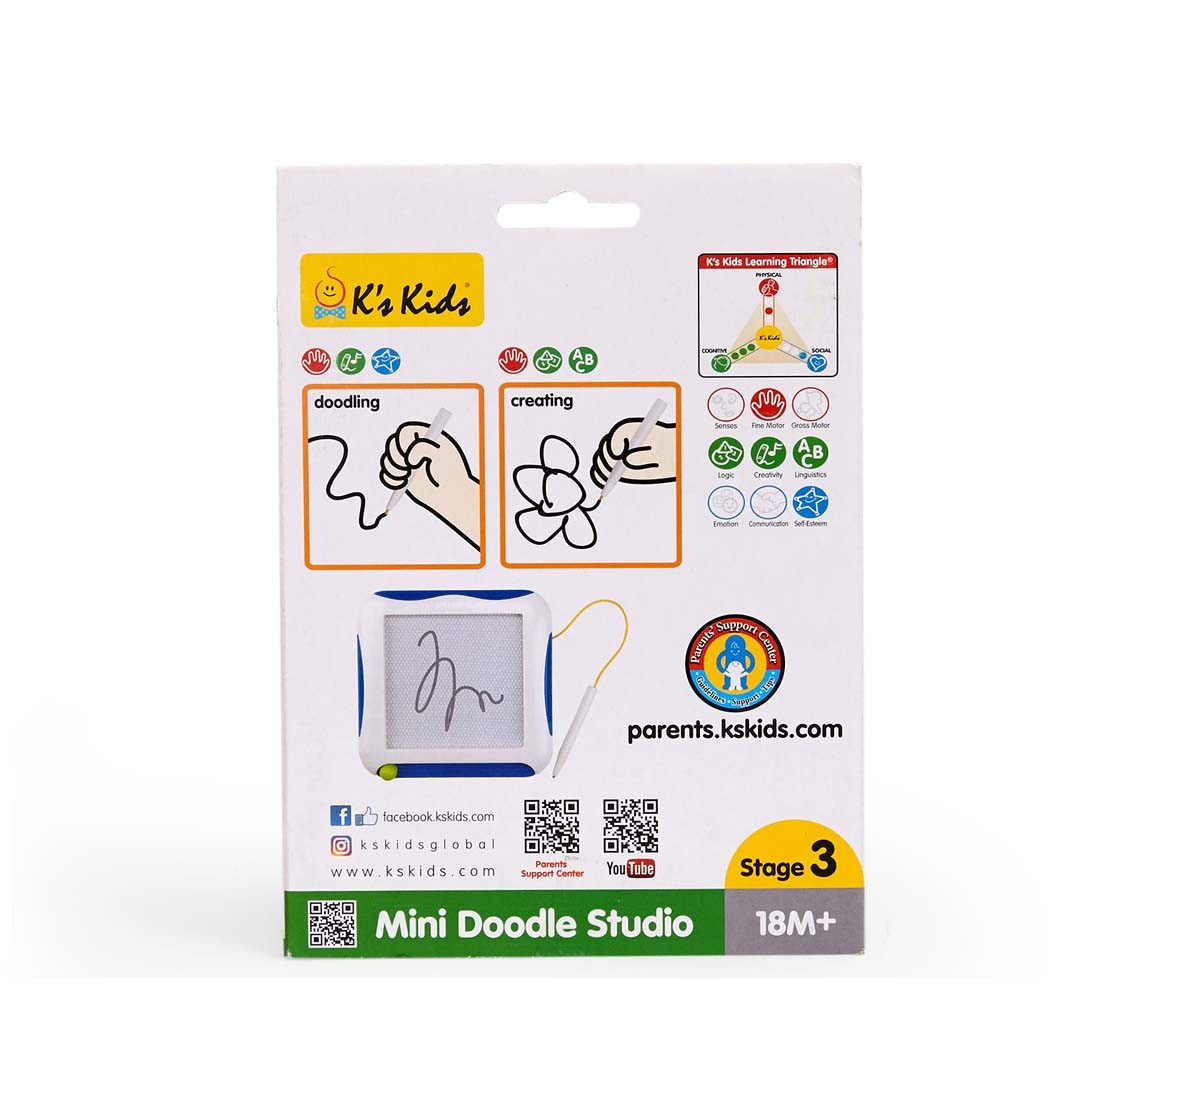  K'S Kids Mini Doodle Studio - White Early Learner Toys for Kids age 12M+